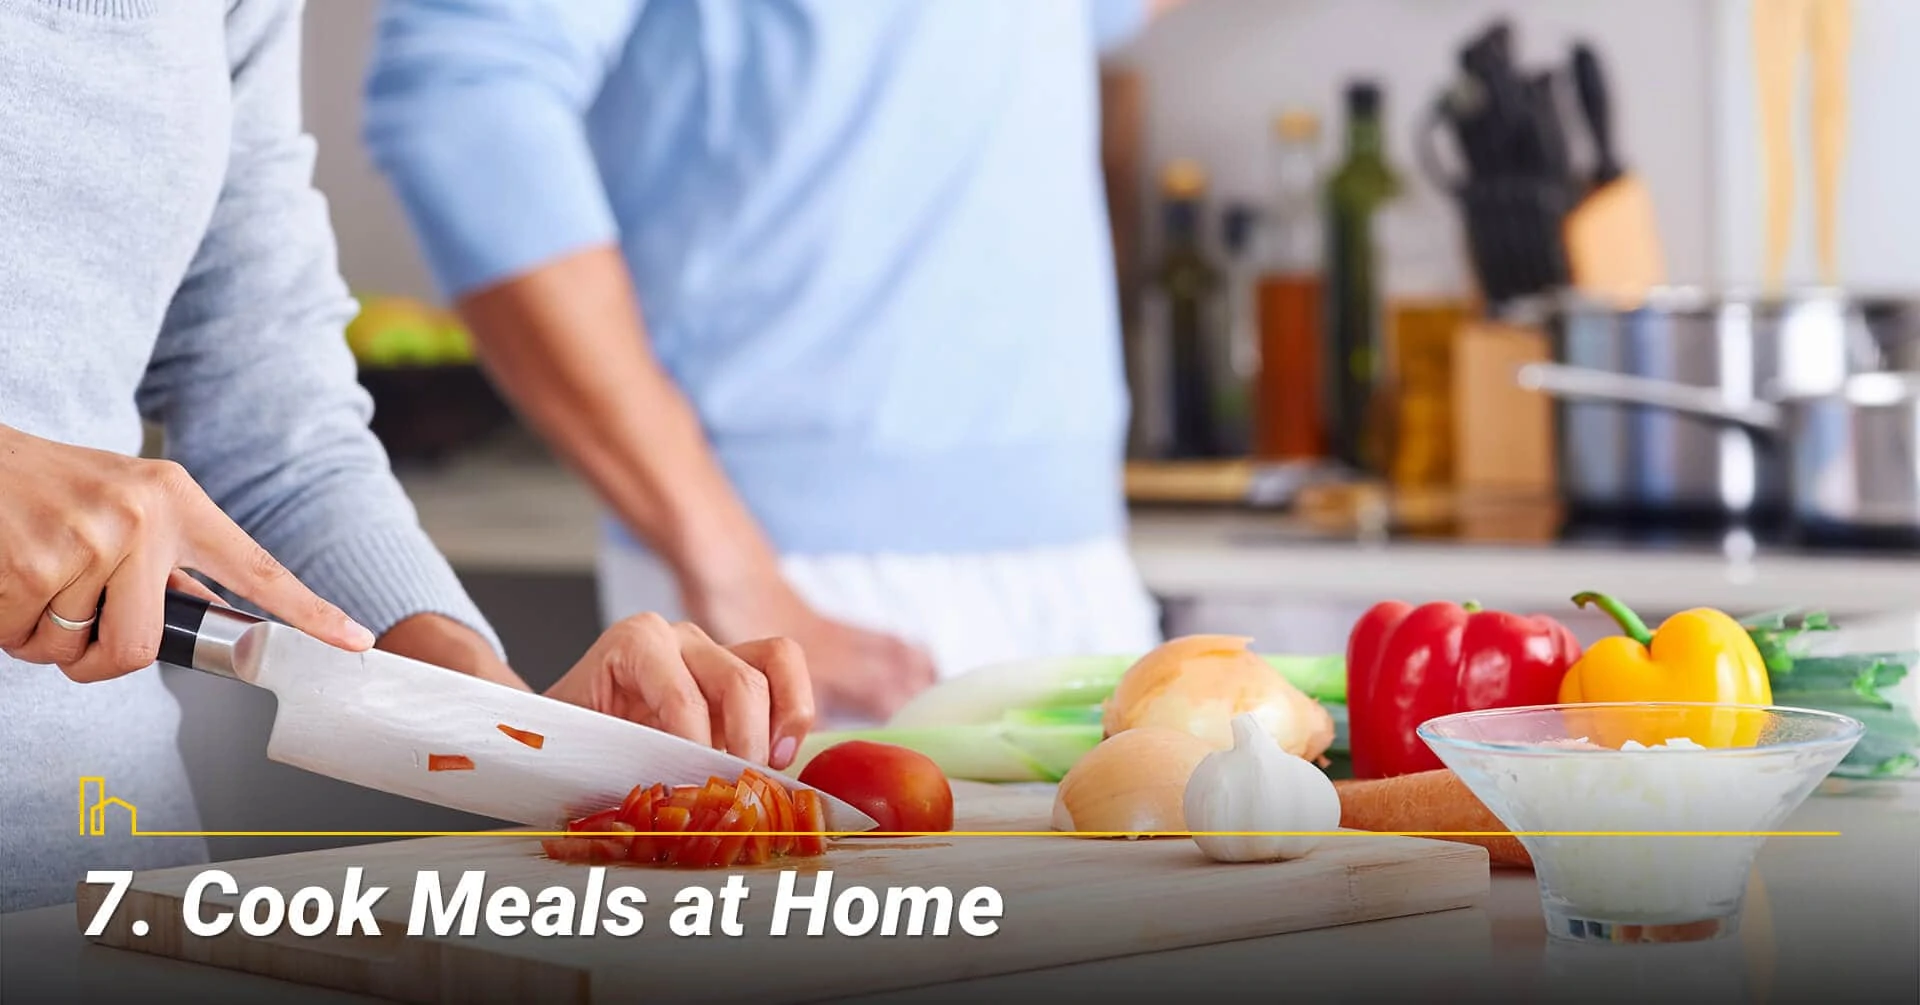 Cook Meals at Home, enjoy your home cook meals